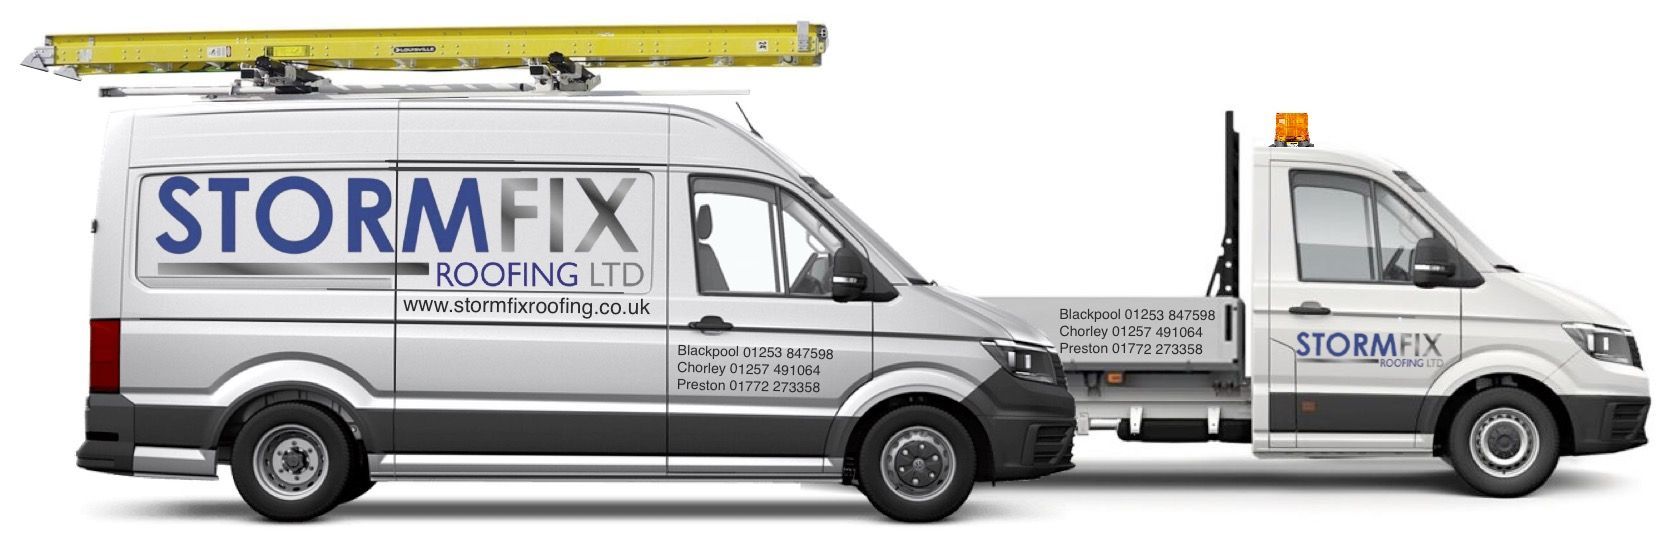 Stormfix Roofing Limited deliver quality roofing services in Preston and throughout Lancashire including Blackpool and Chorley.